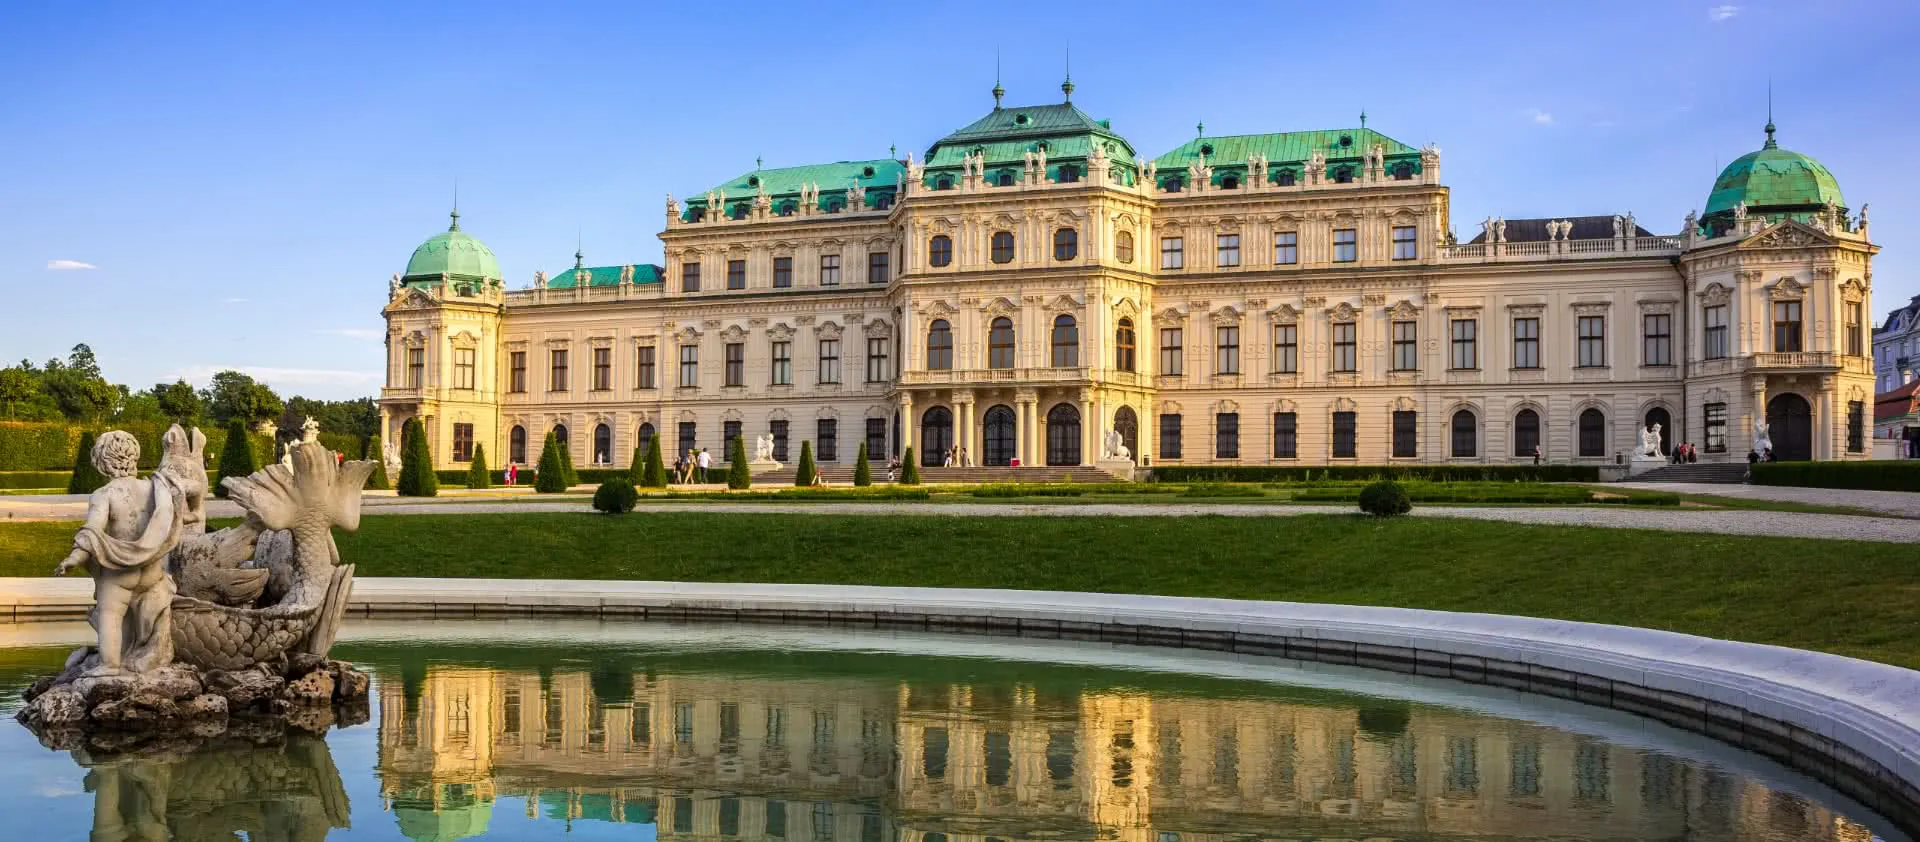 Vienna - the destination for bus trips